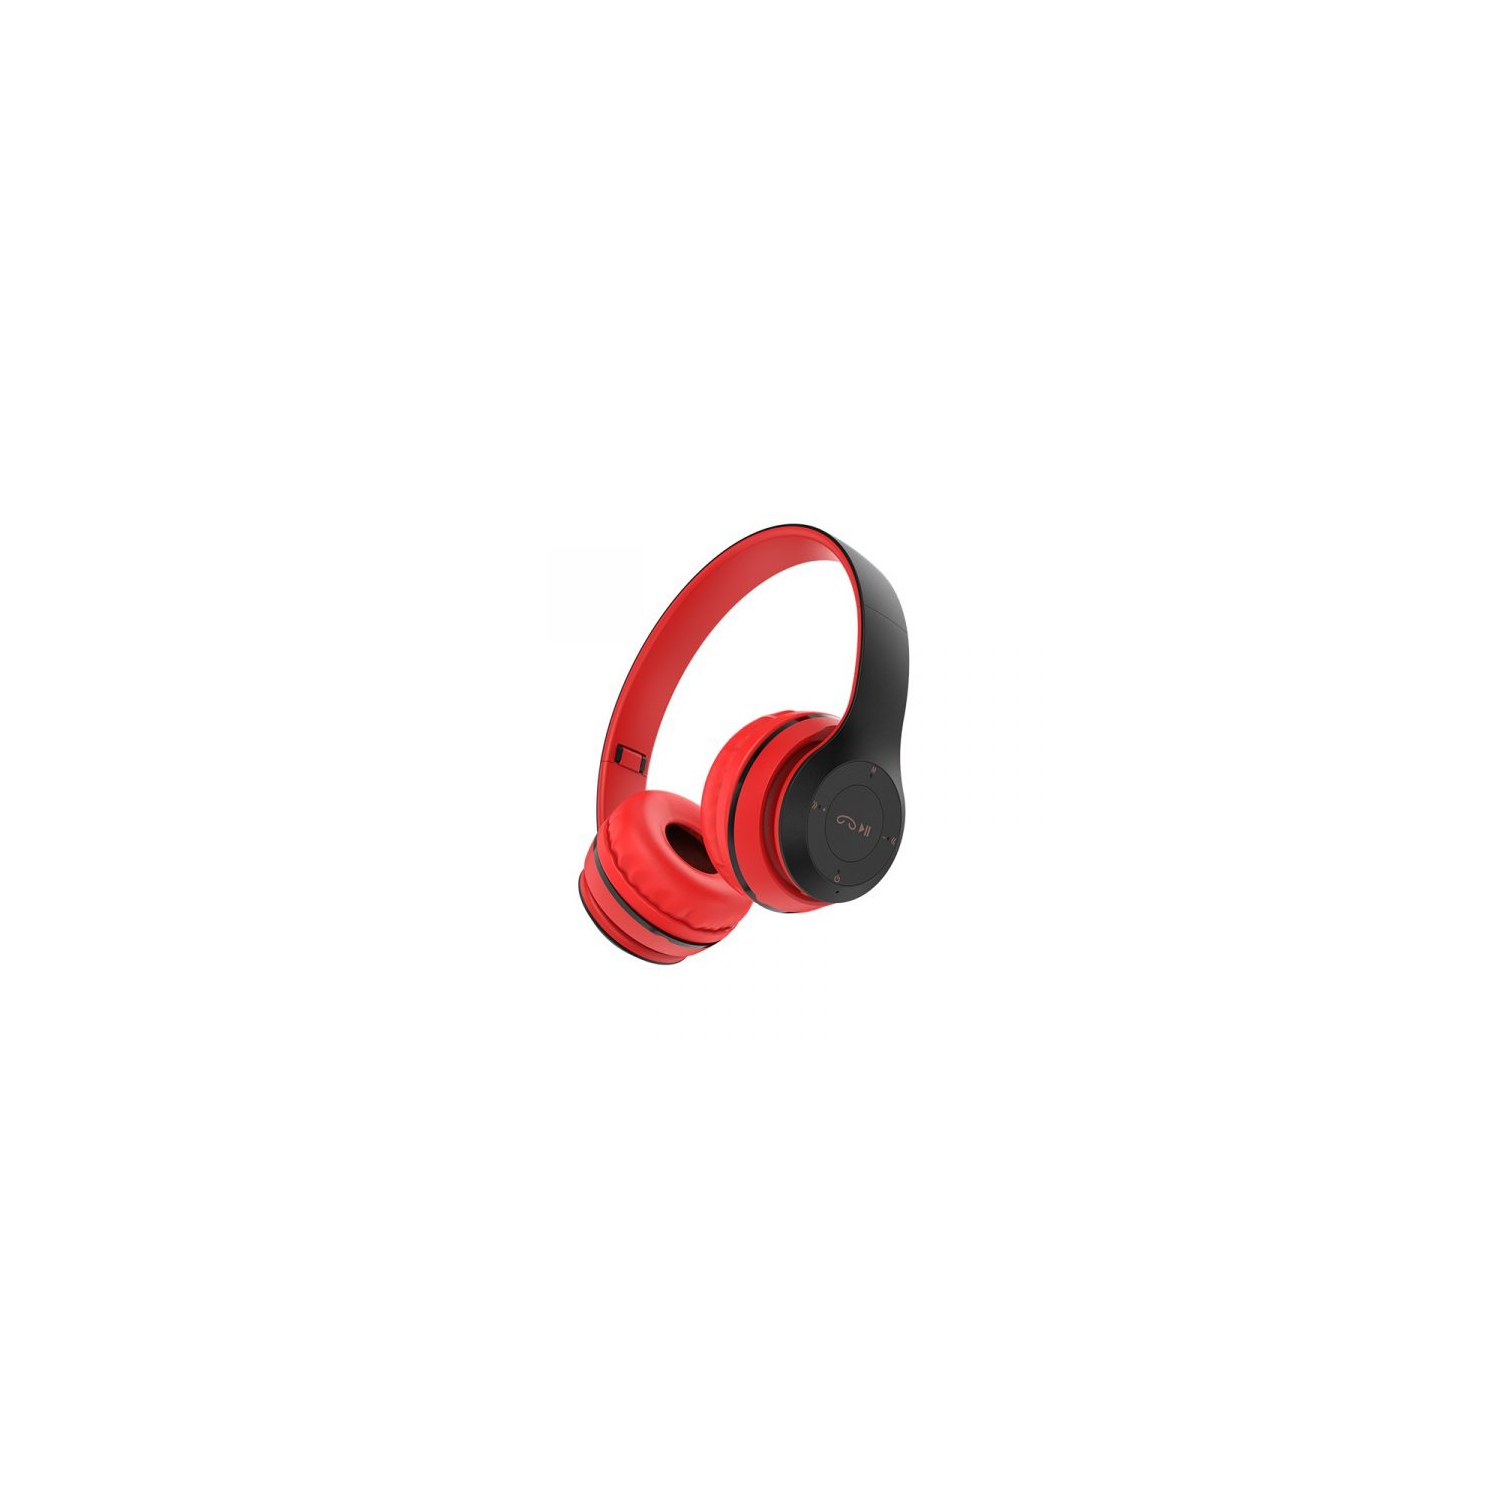 Bluetooth V5.0 Wireless / Wired Stereo Headphones Headsets with Microphone, Red